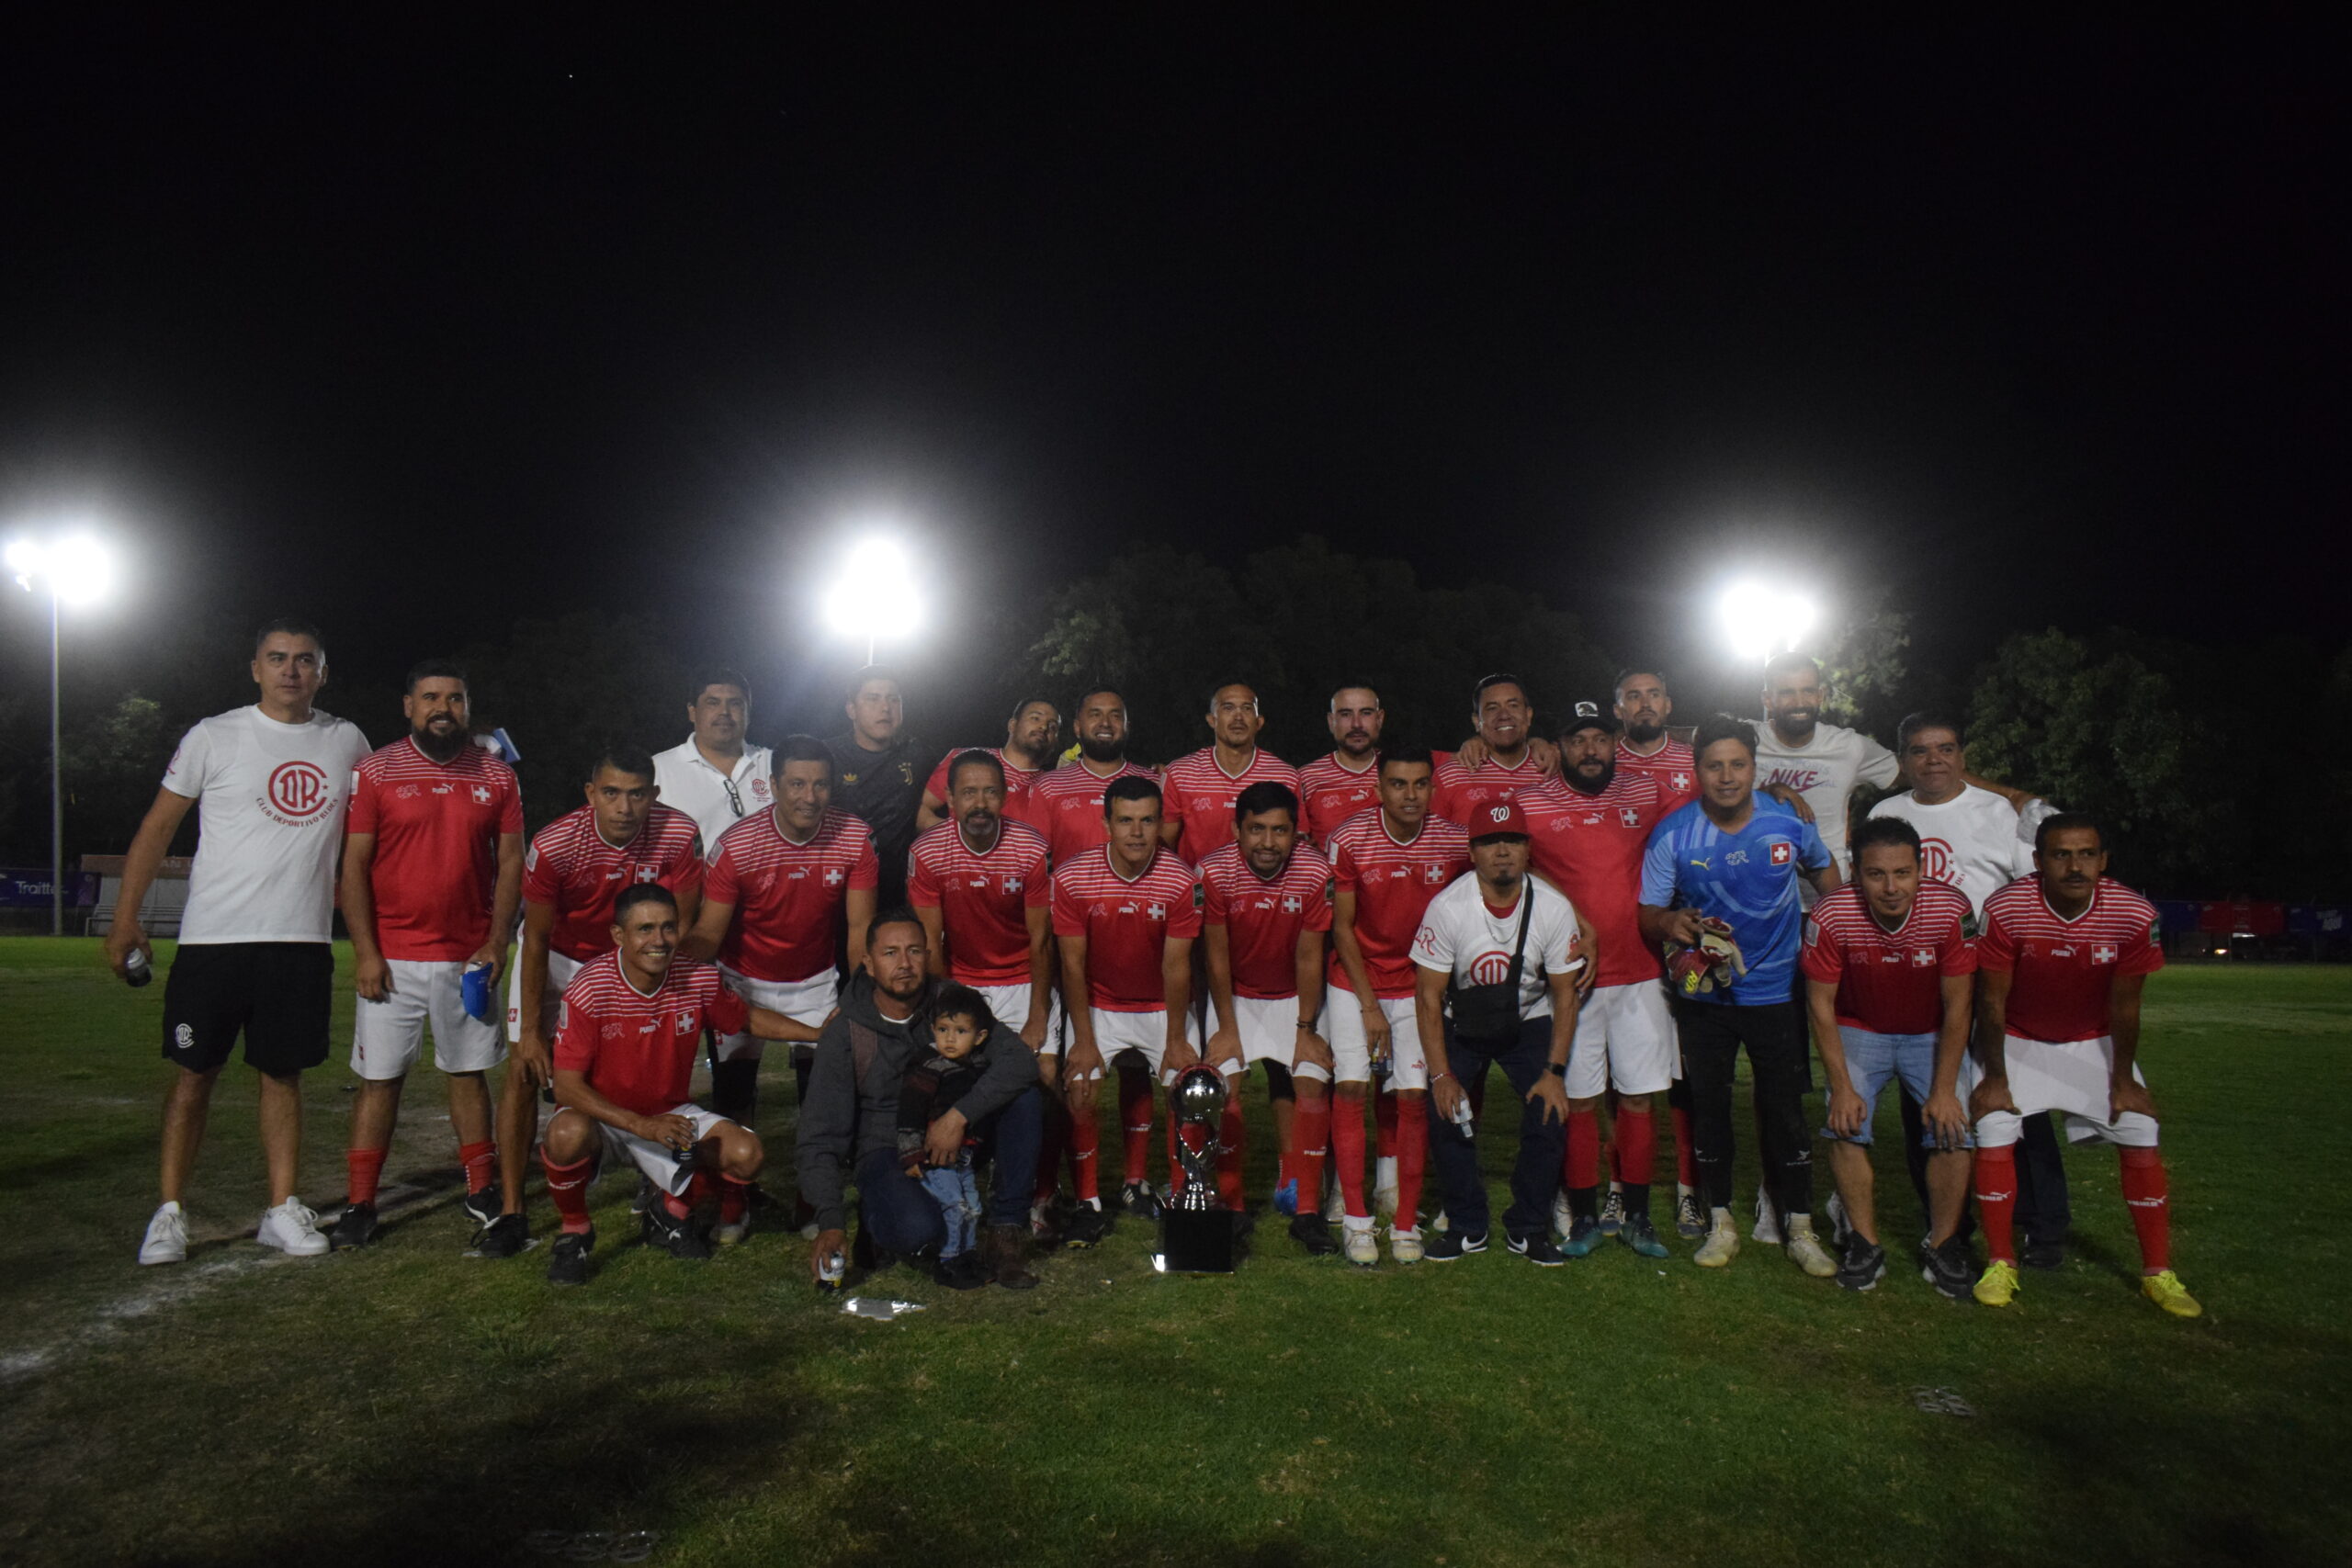 Club Redes crowned champions of the Chapala Saturday League 3rd year running